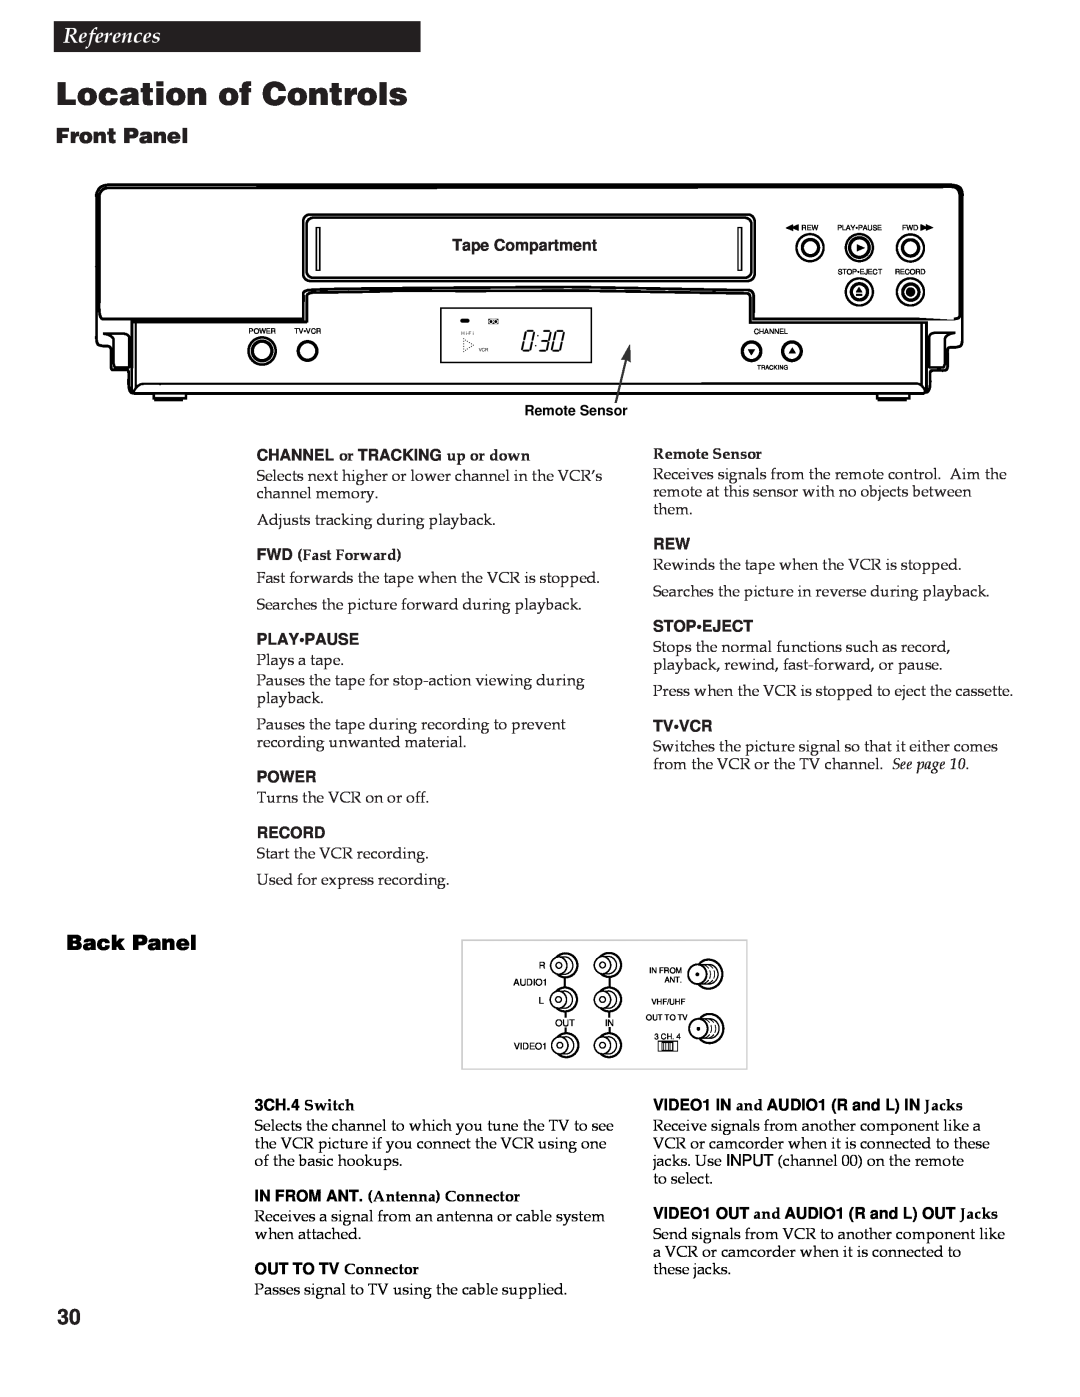 RCA VR642HF manual Location of Controls, References, Front Panel, Back Panel 